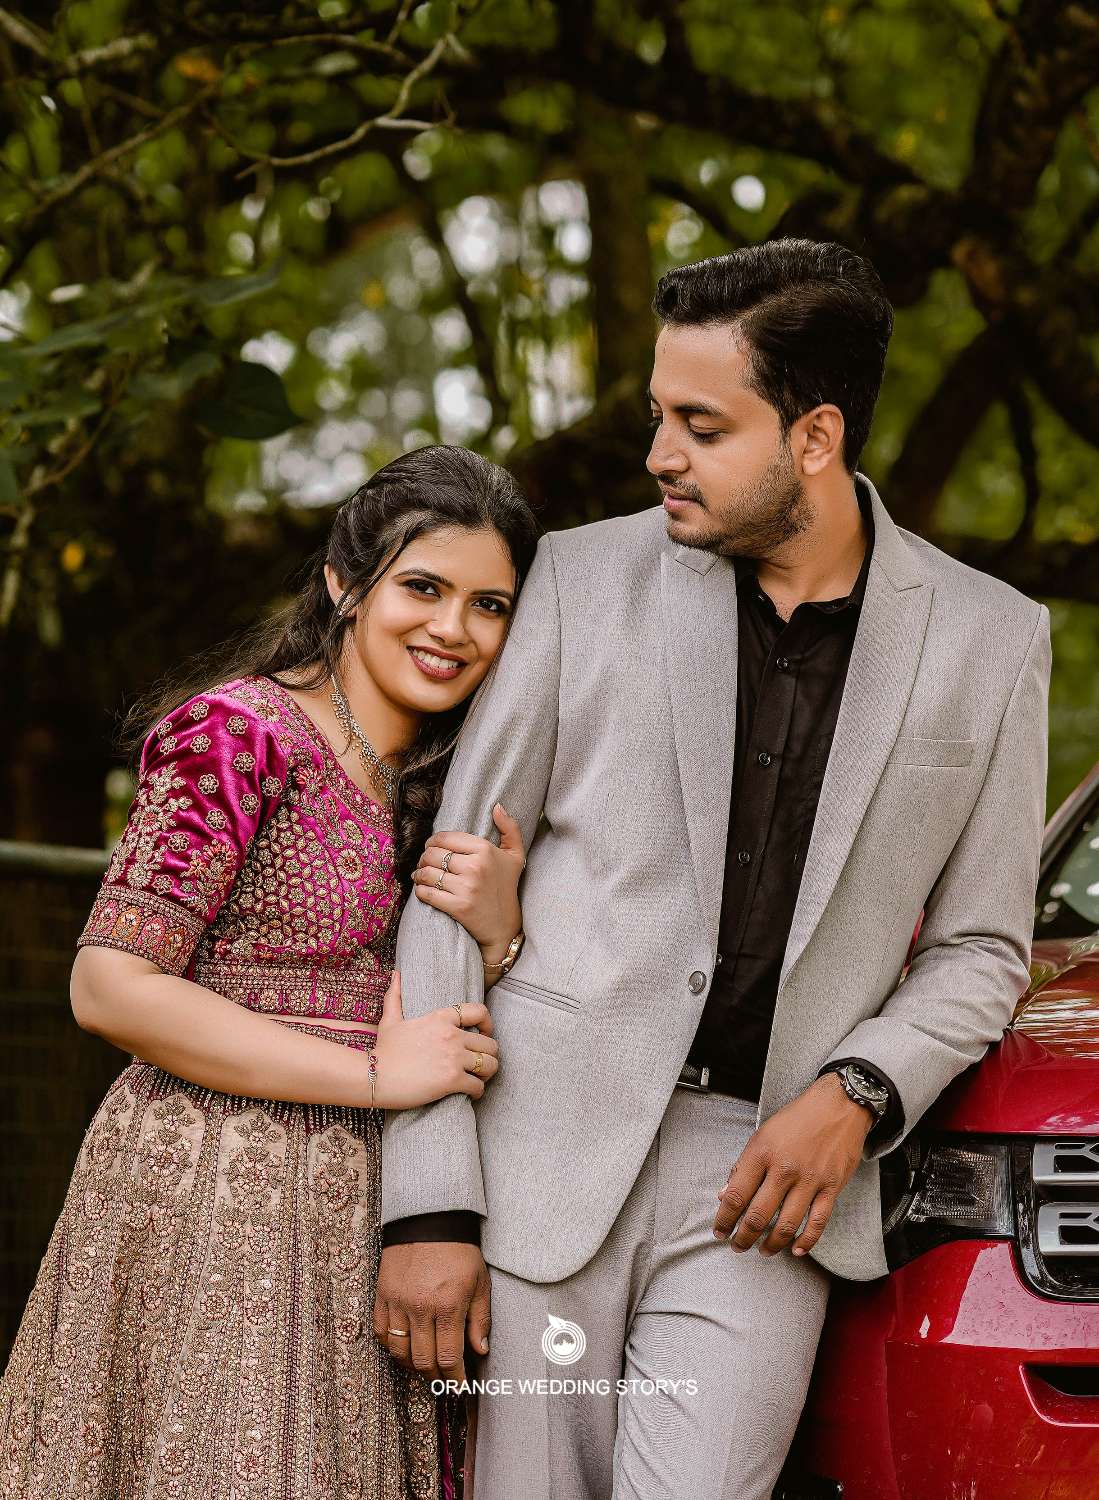 Our wish, our photos': Couple abused and trolled for viral wedding shoot  respond